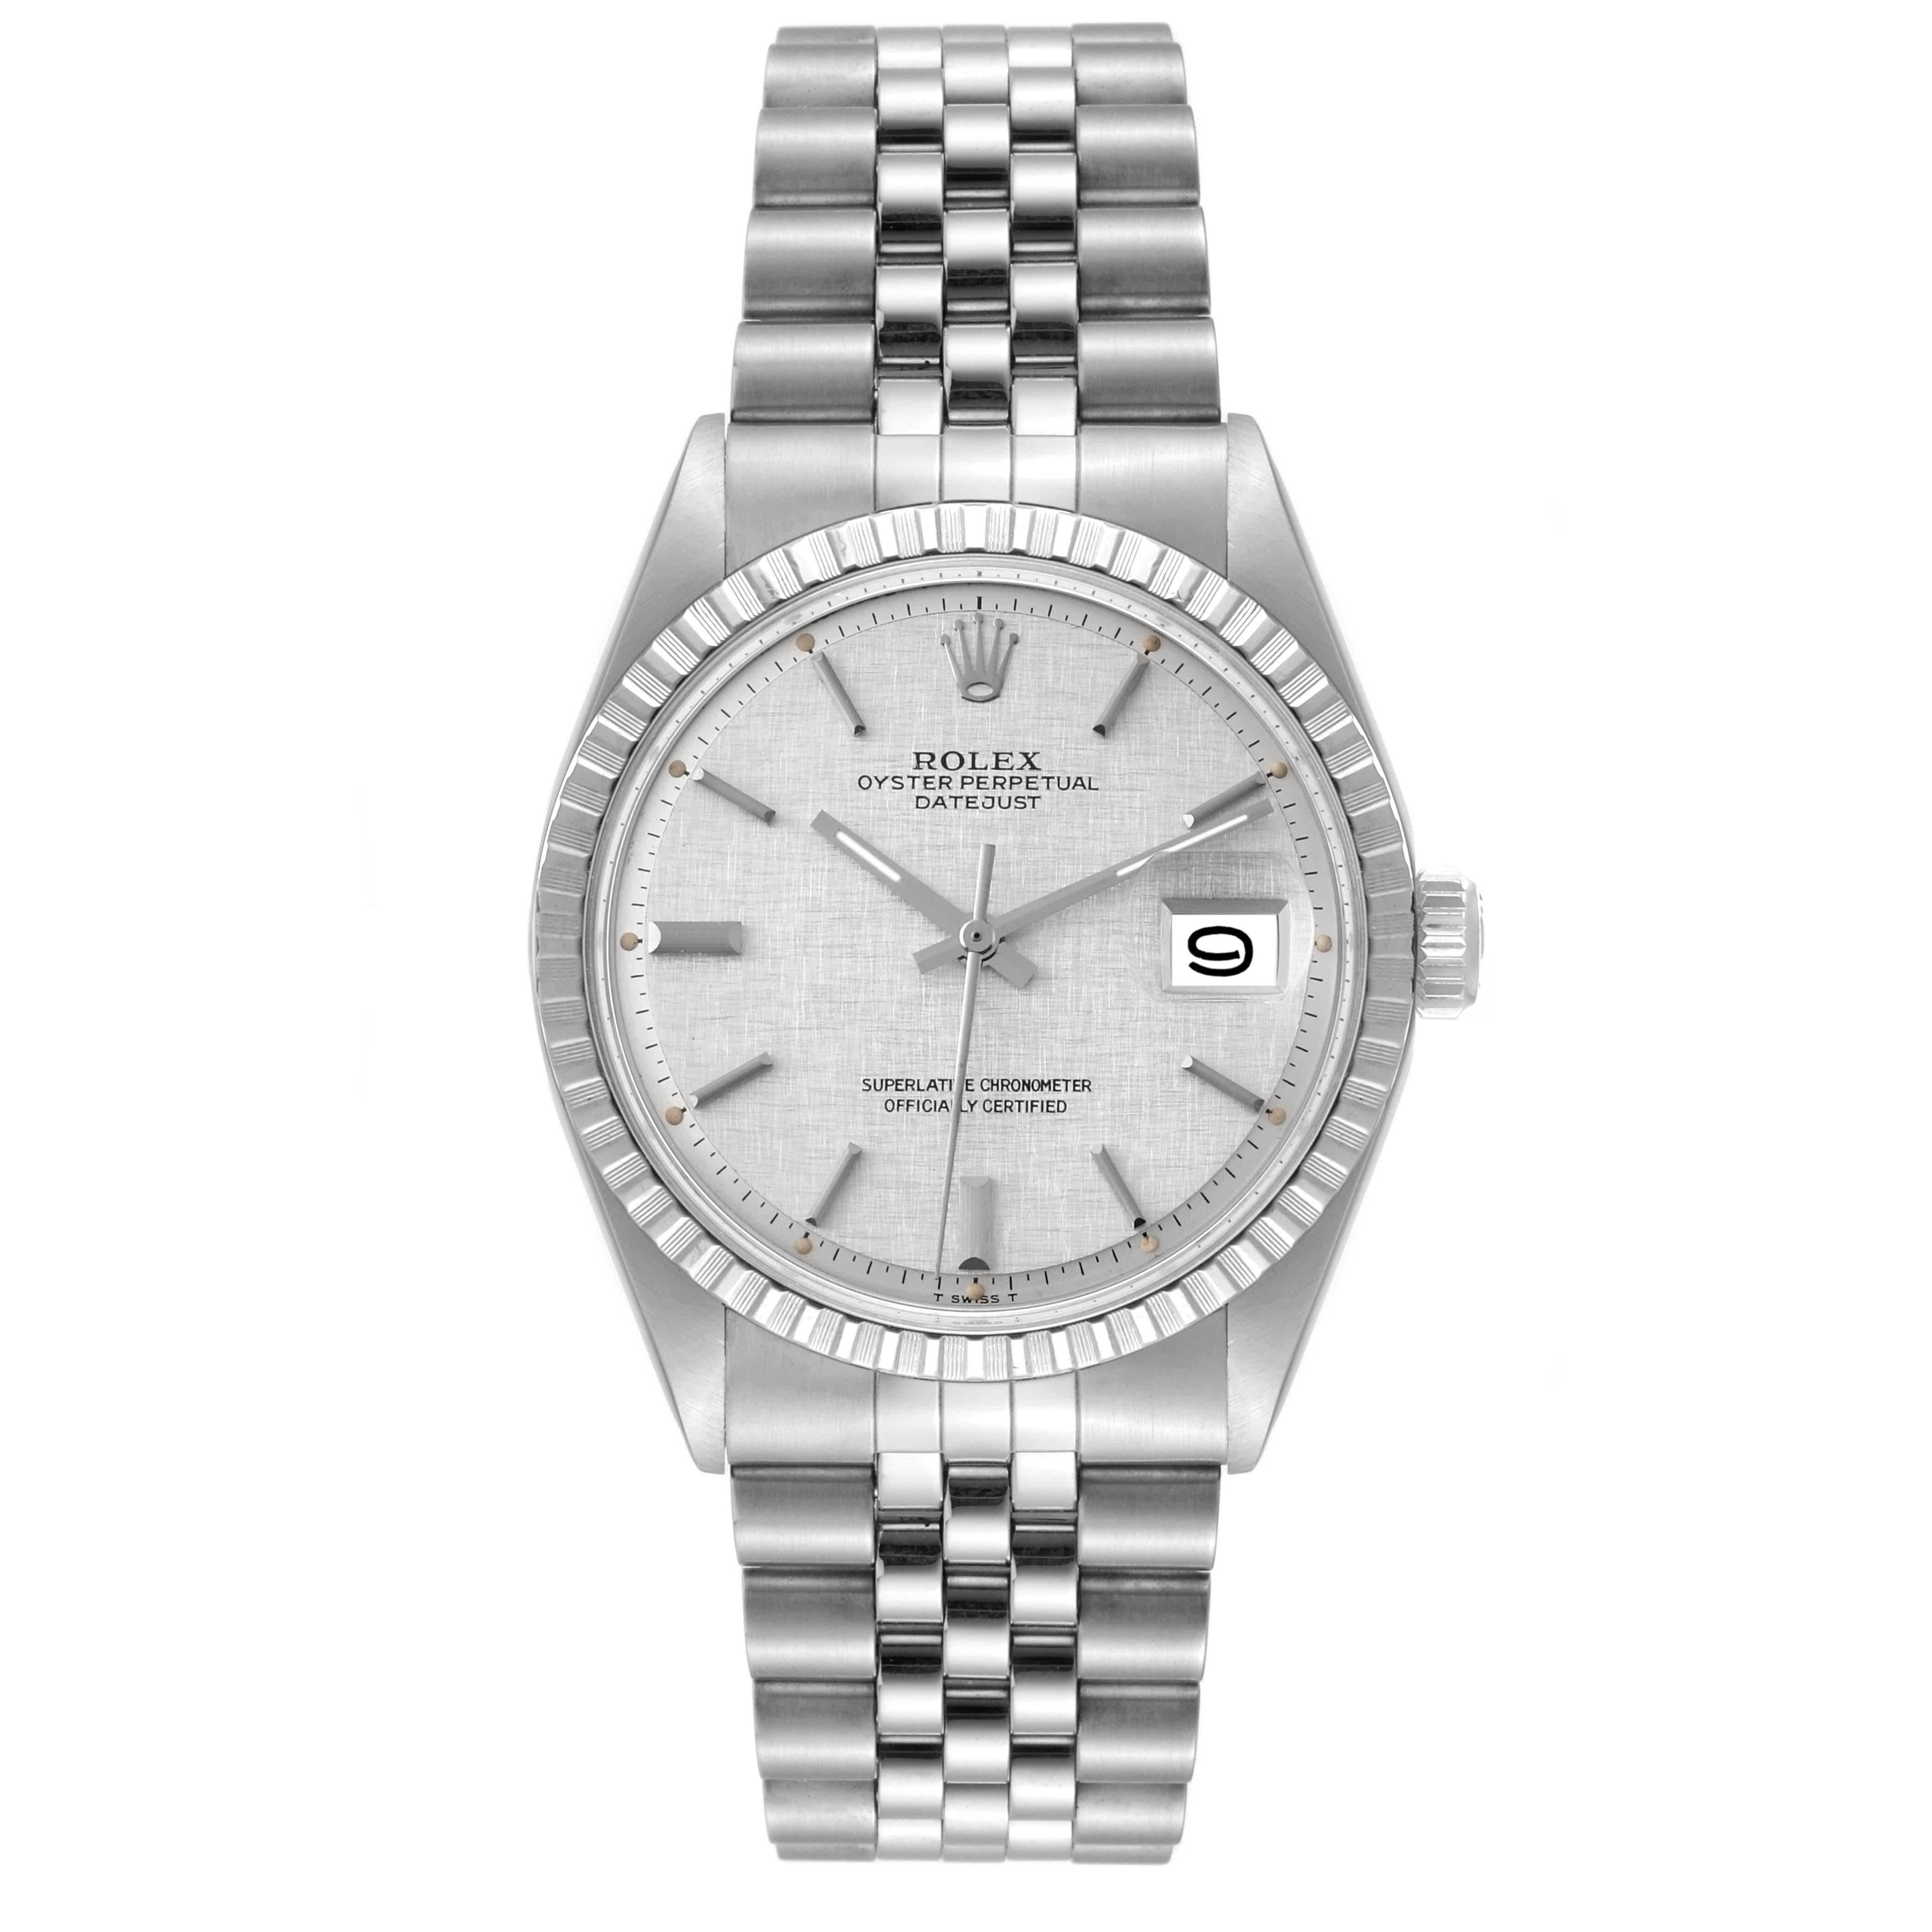 Rolex Datejust Silver Linen Dial Vintage Steel Mens Watch 1603. Officially certified chronometer self-winding movement. Stainless steel oyster case 36 mm in diameter. Rolex logo on a crown. Stainless steel engine turned bezel. Acrylic crystal with